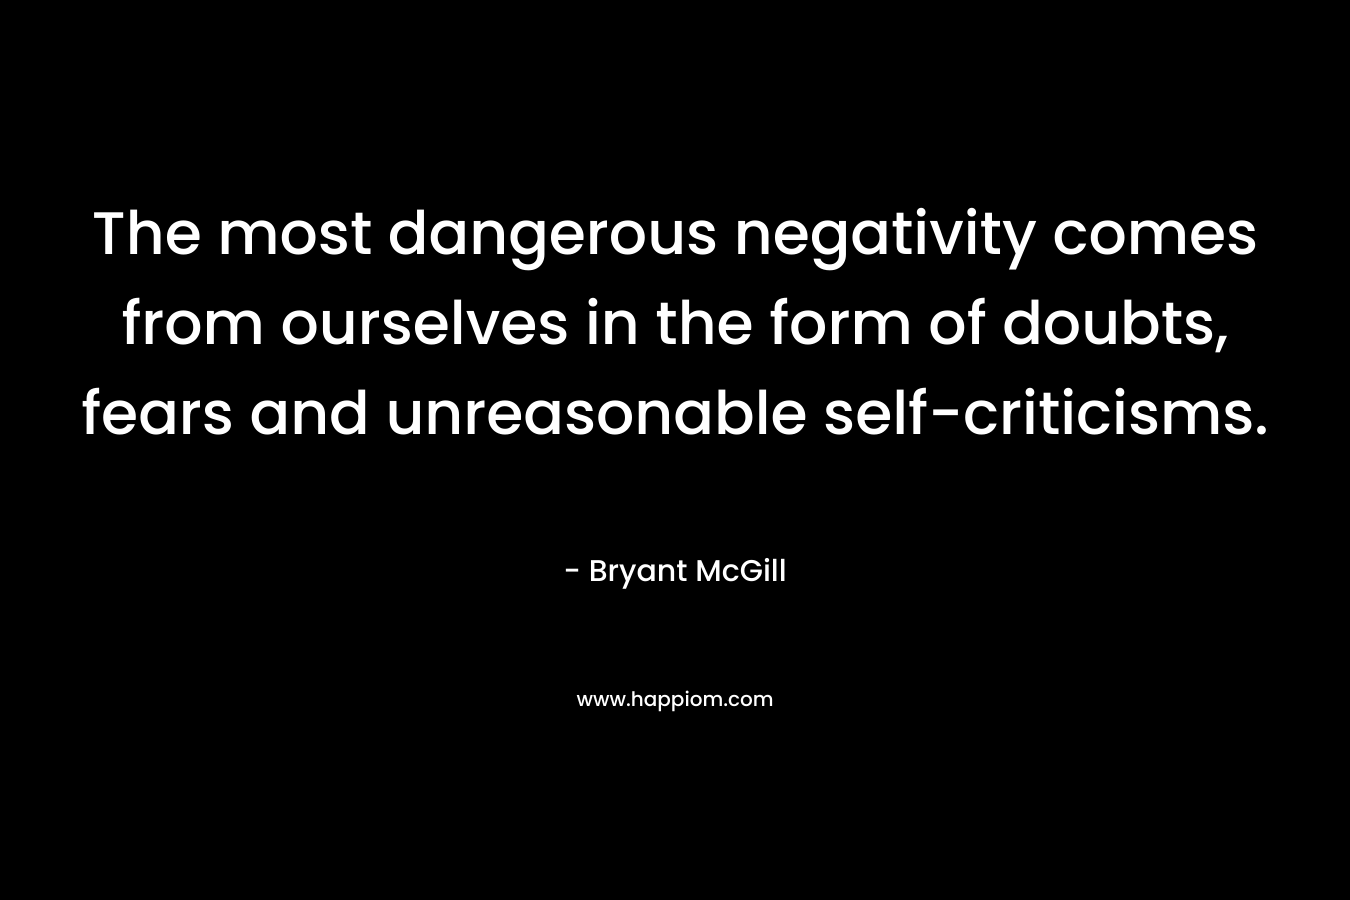 The most dangerous negativity comes from ourselves in the form of doubts, fears and unreasonable self-criticisms. – Bryant McGill